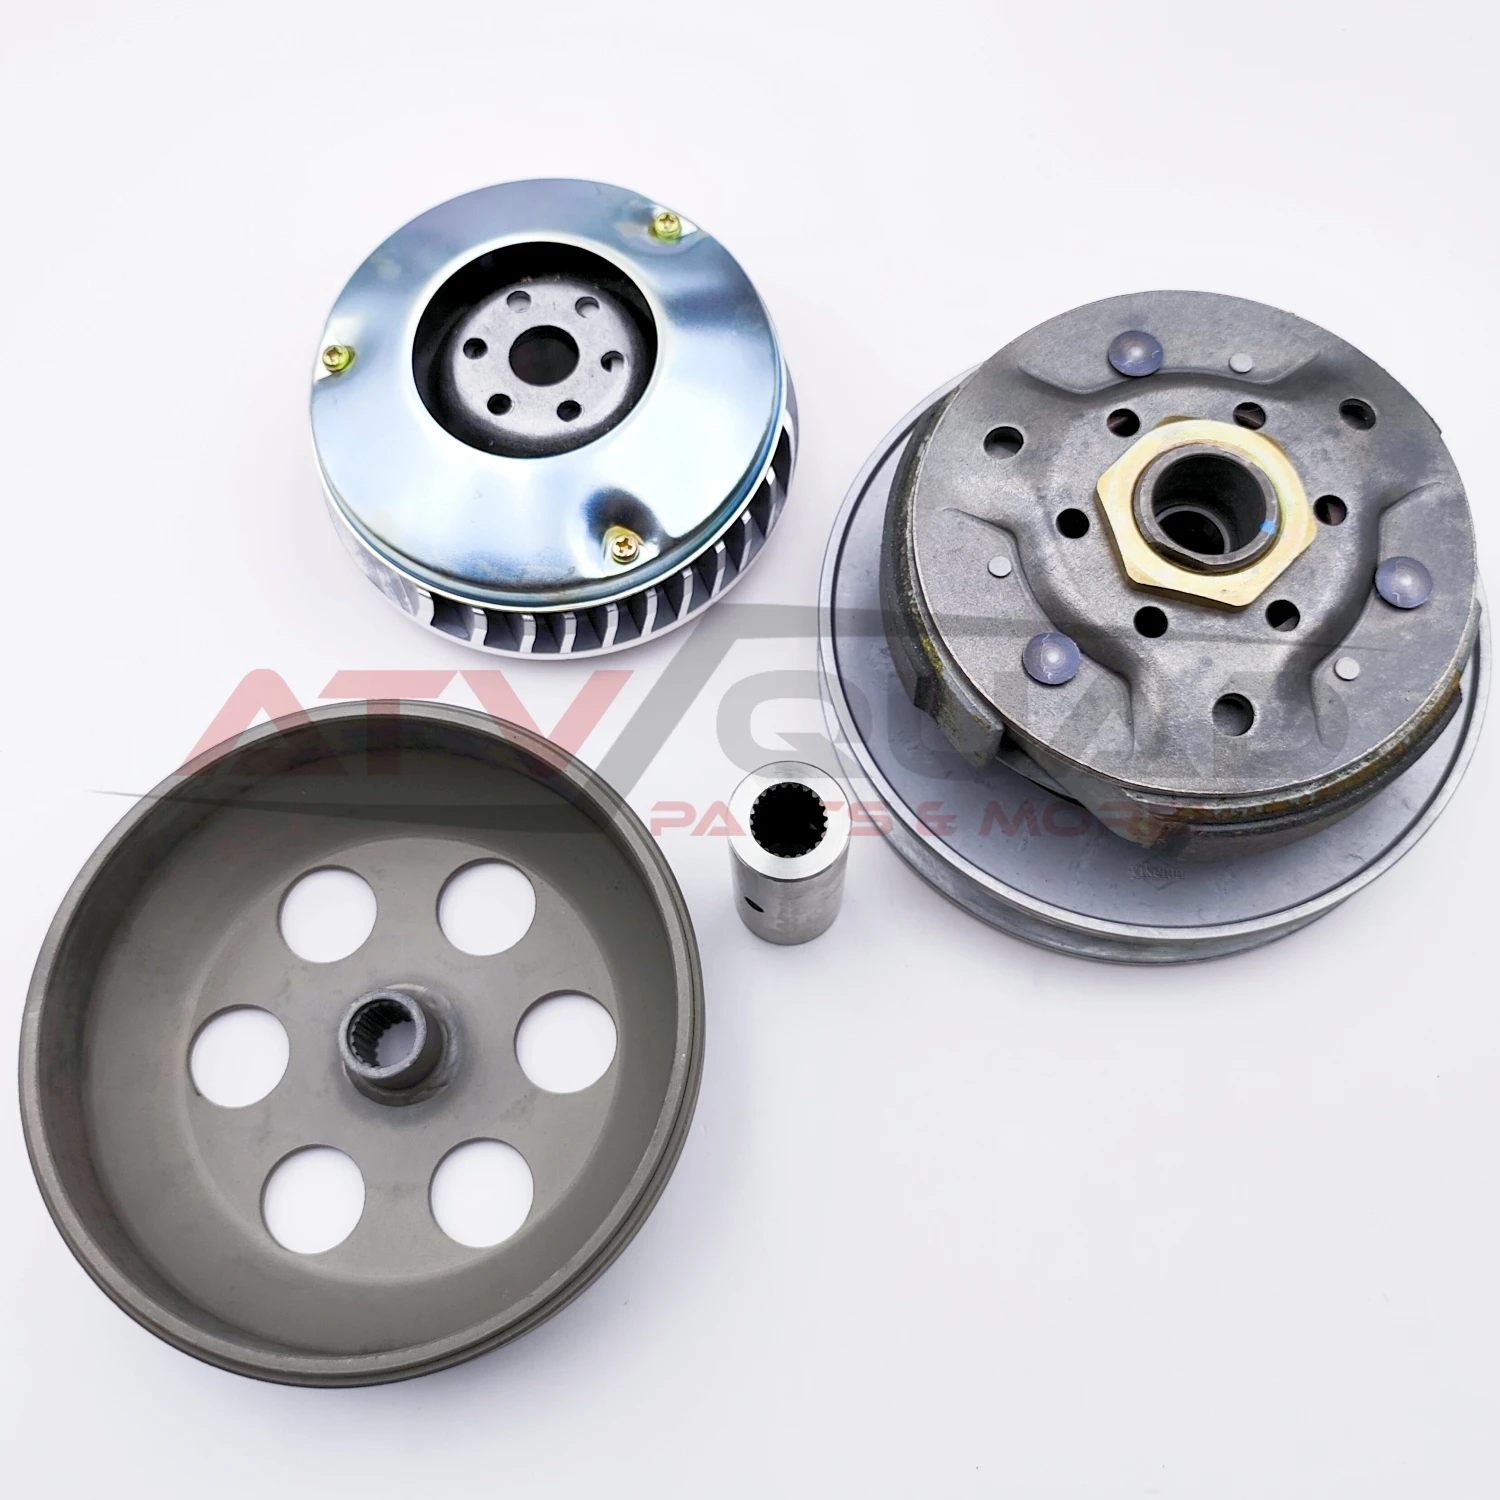 CVT Variator Set Front Rear Clutch Pulley Assy for Kymco Mongoose Mxu 250 300 Maxxer 300 Dink 250 Xciting 250 Downtown 300